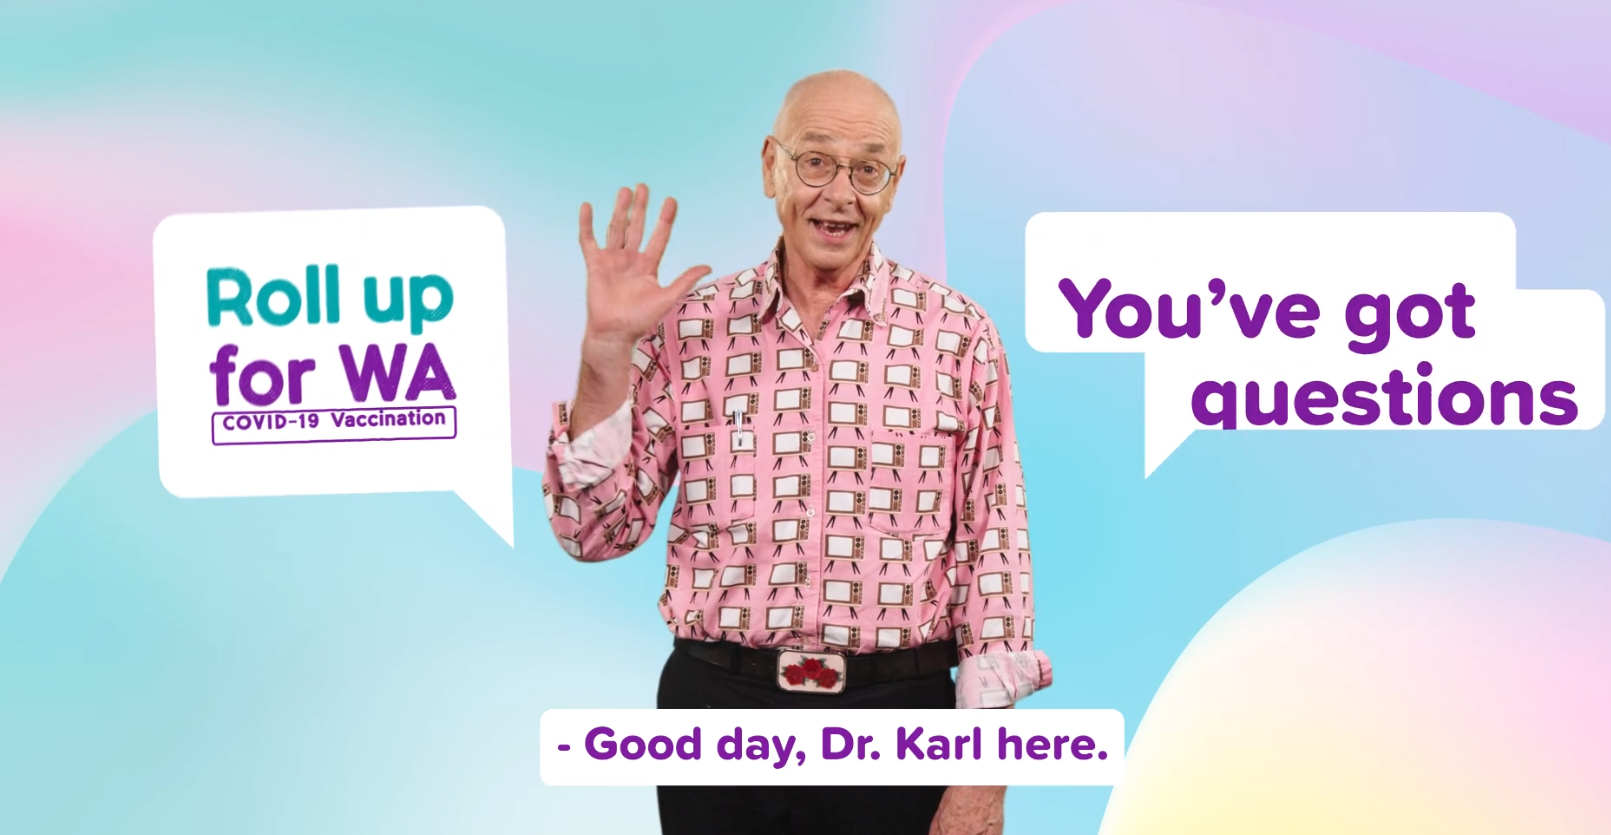 Preview image showing Dr Karl as part of the You've got Questions video series